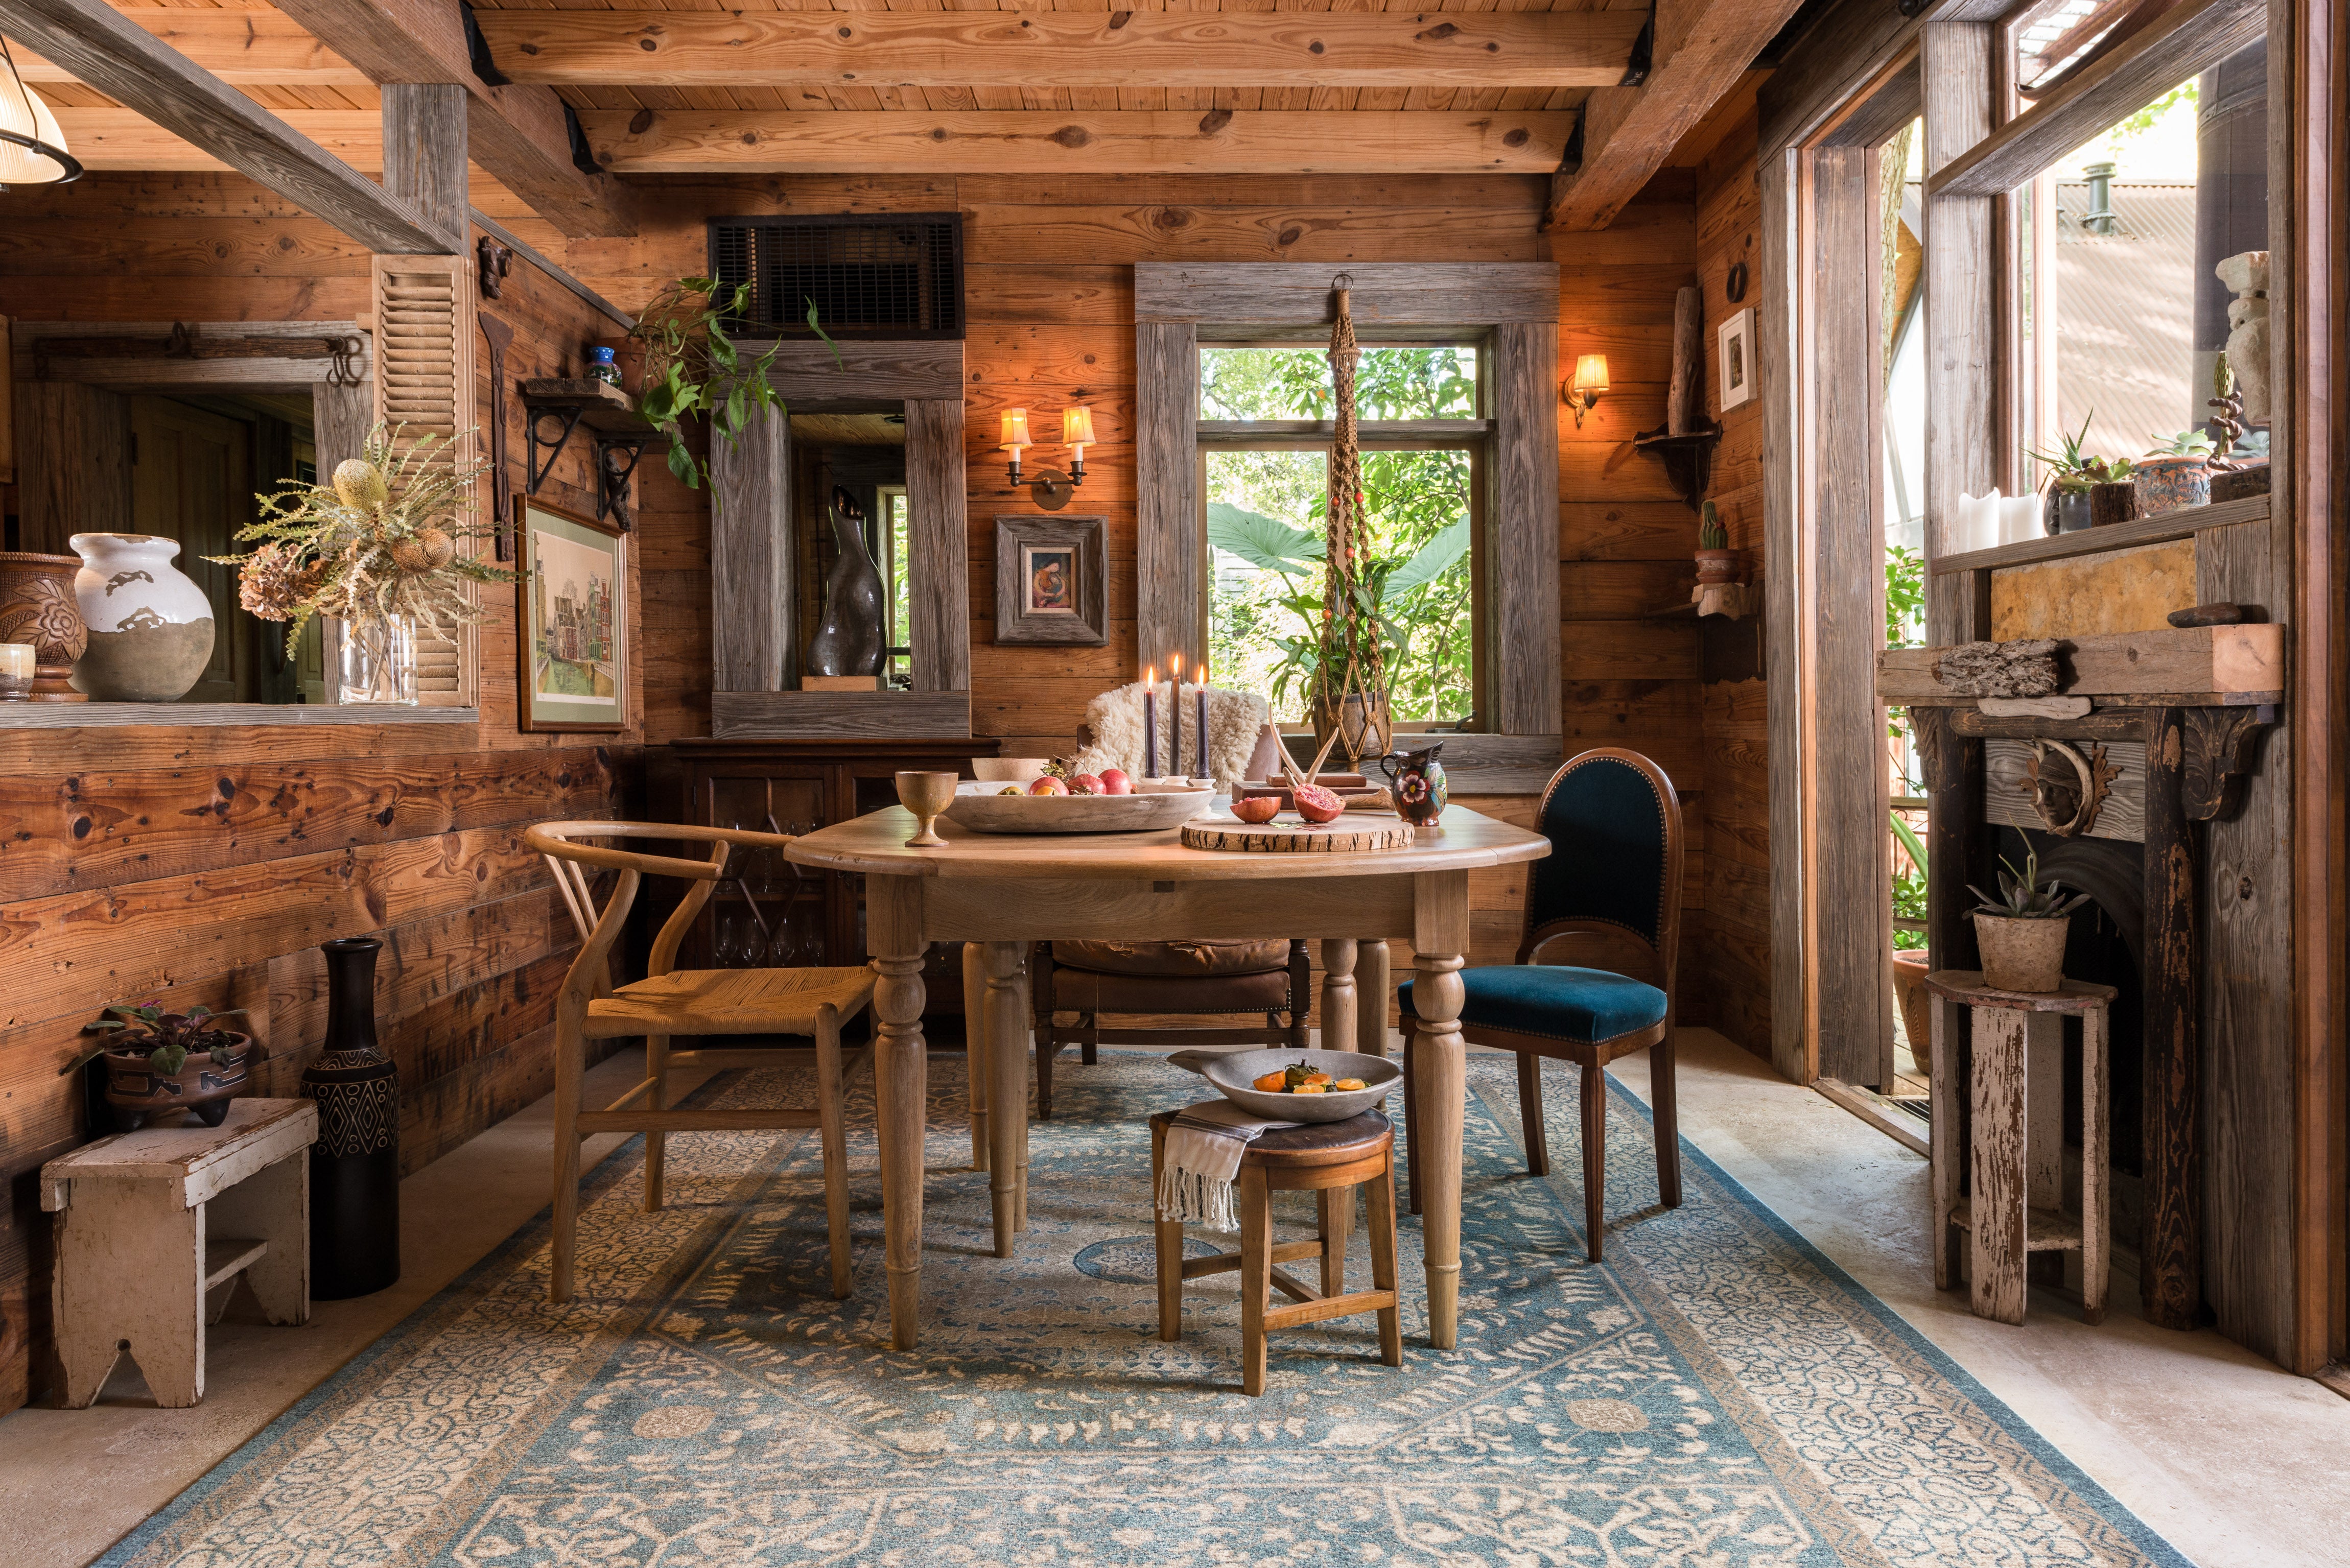 a cabin dining room with wooden walls and ceiling beams. There is a wooden table with four chairs and a blue traditional rug underneath.